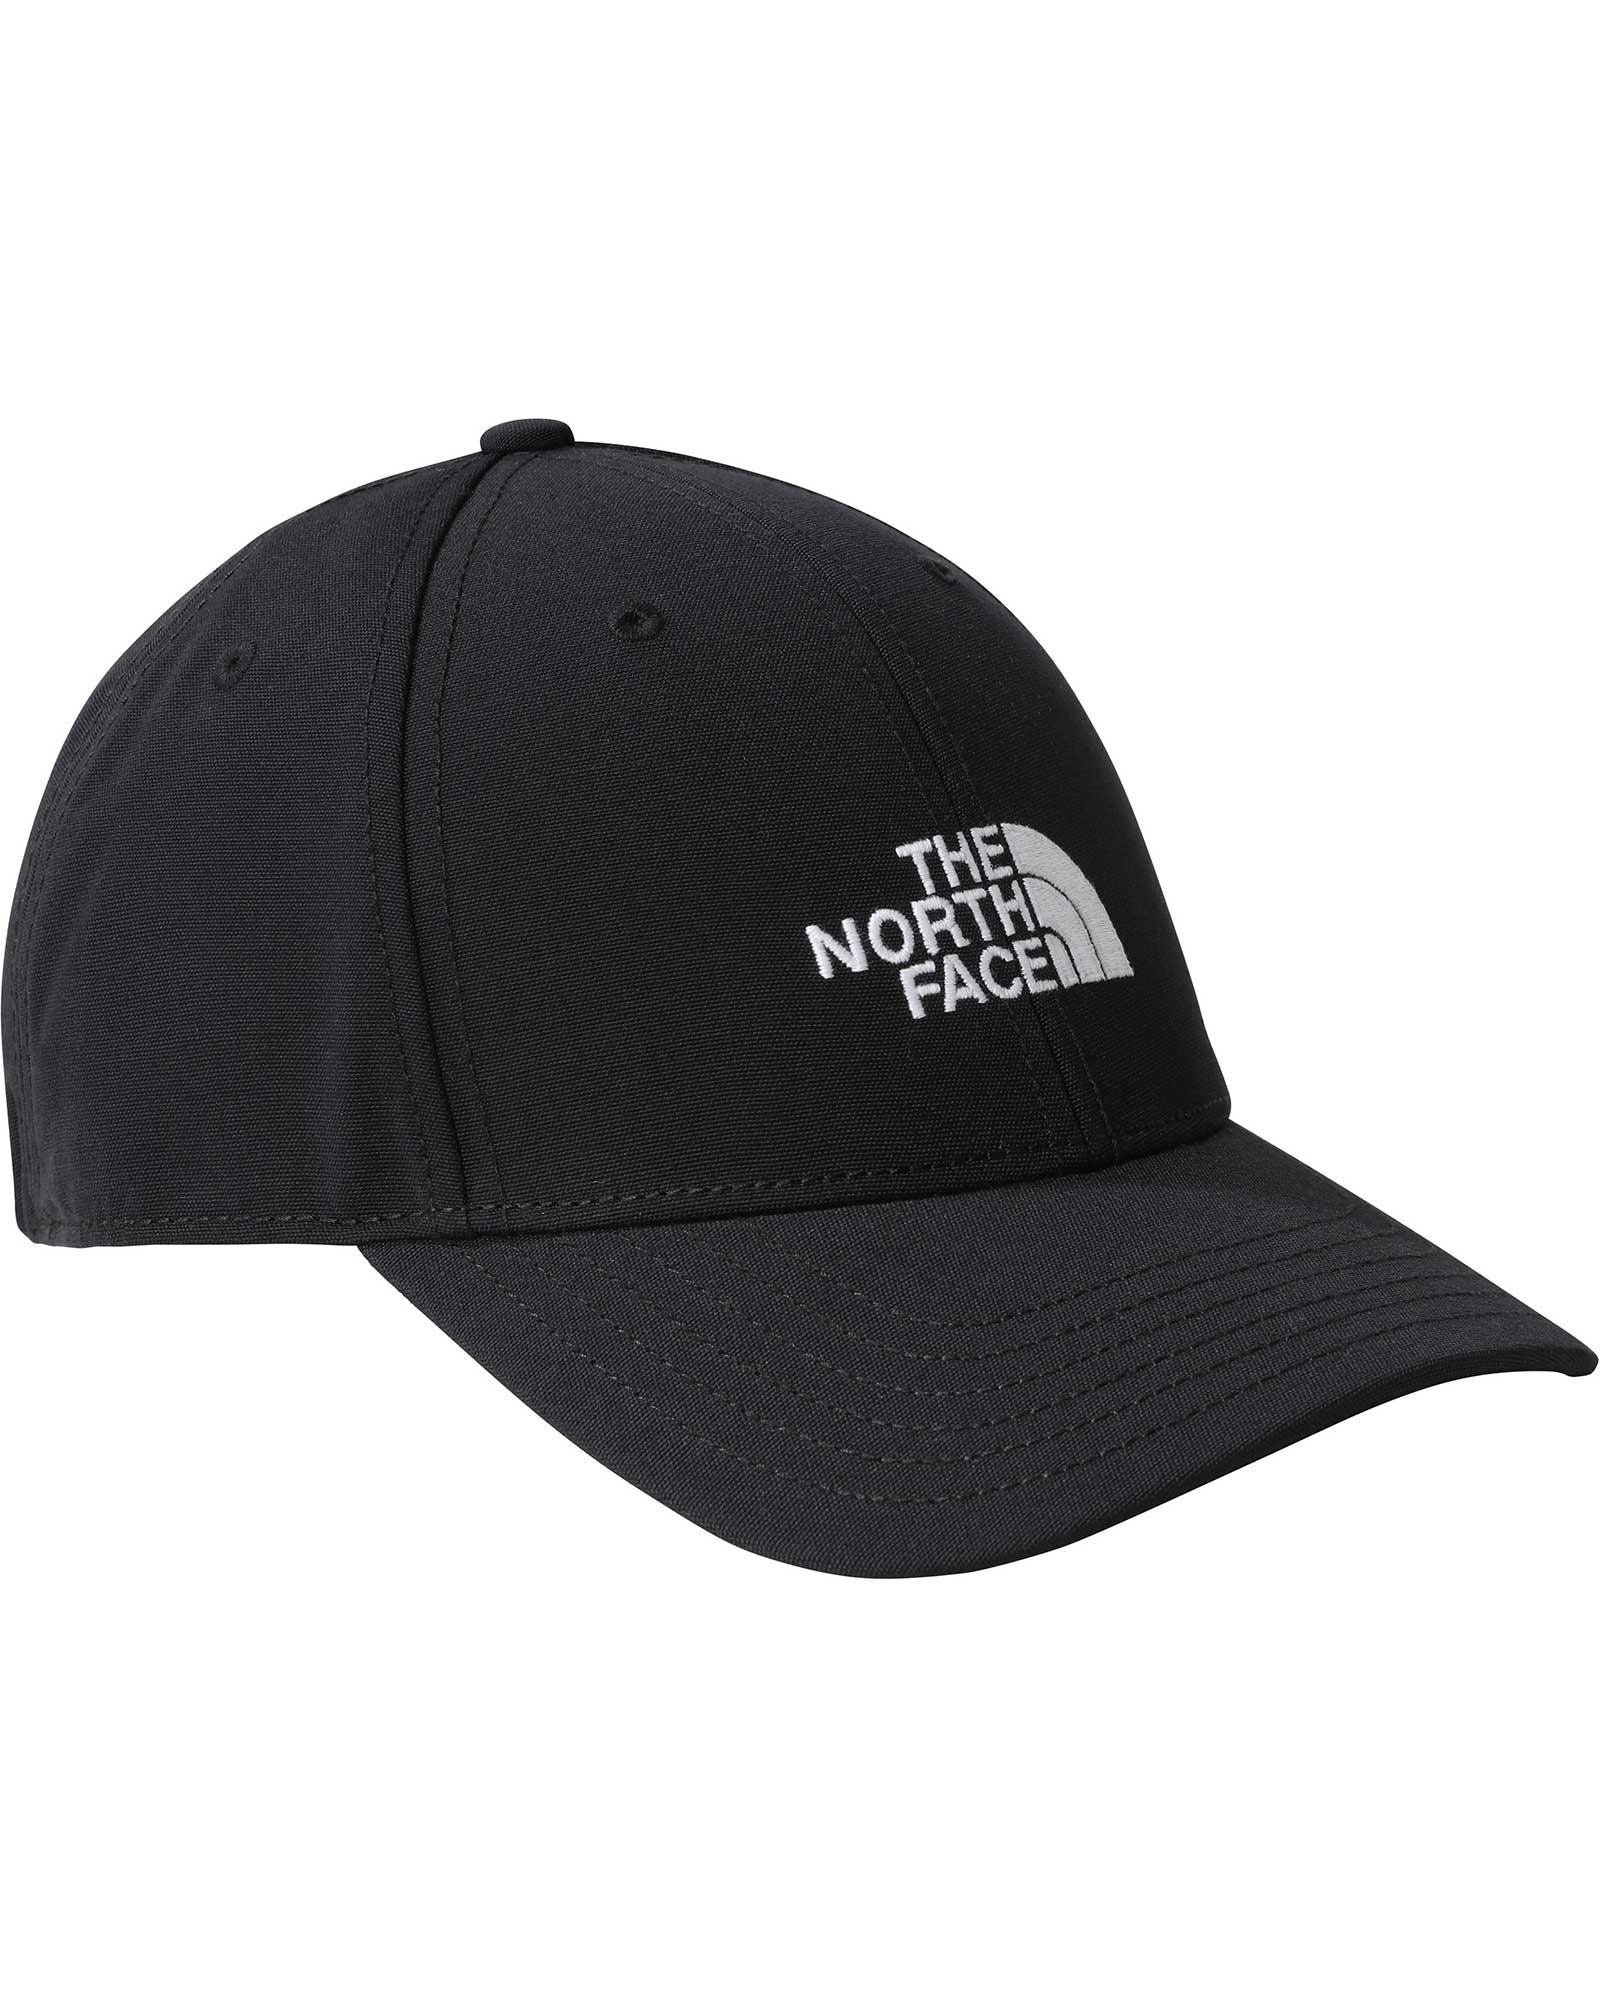 The North Face Classic Recycled 66 Kids Hat